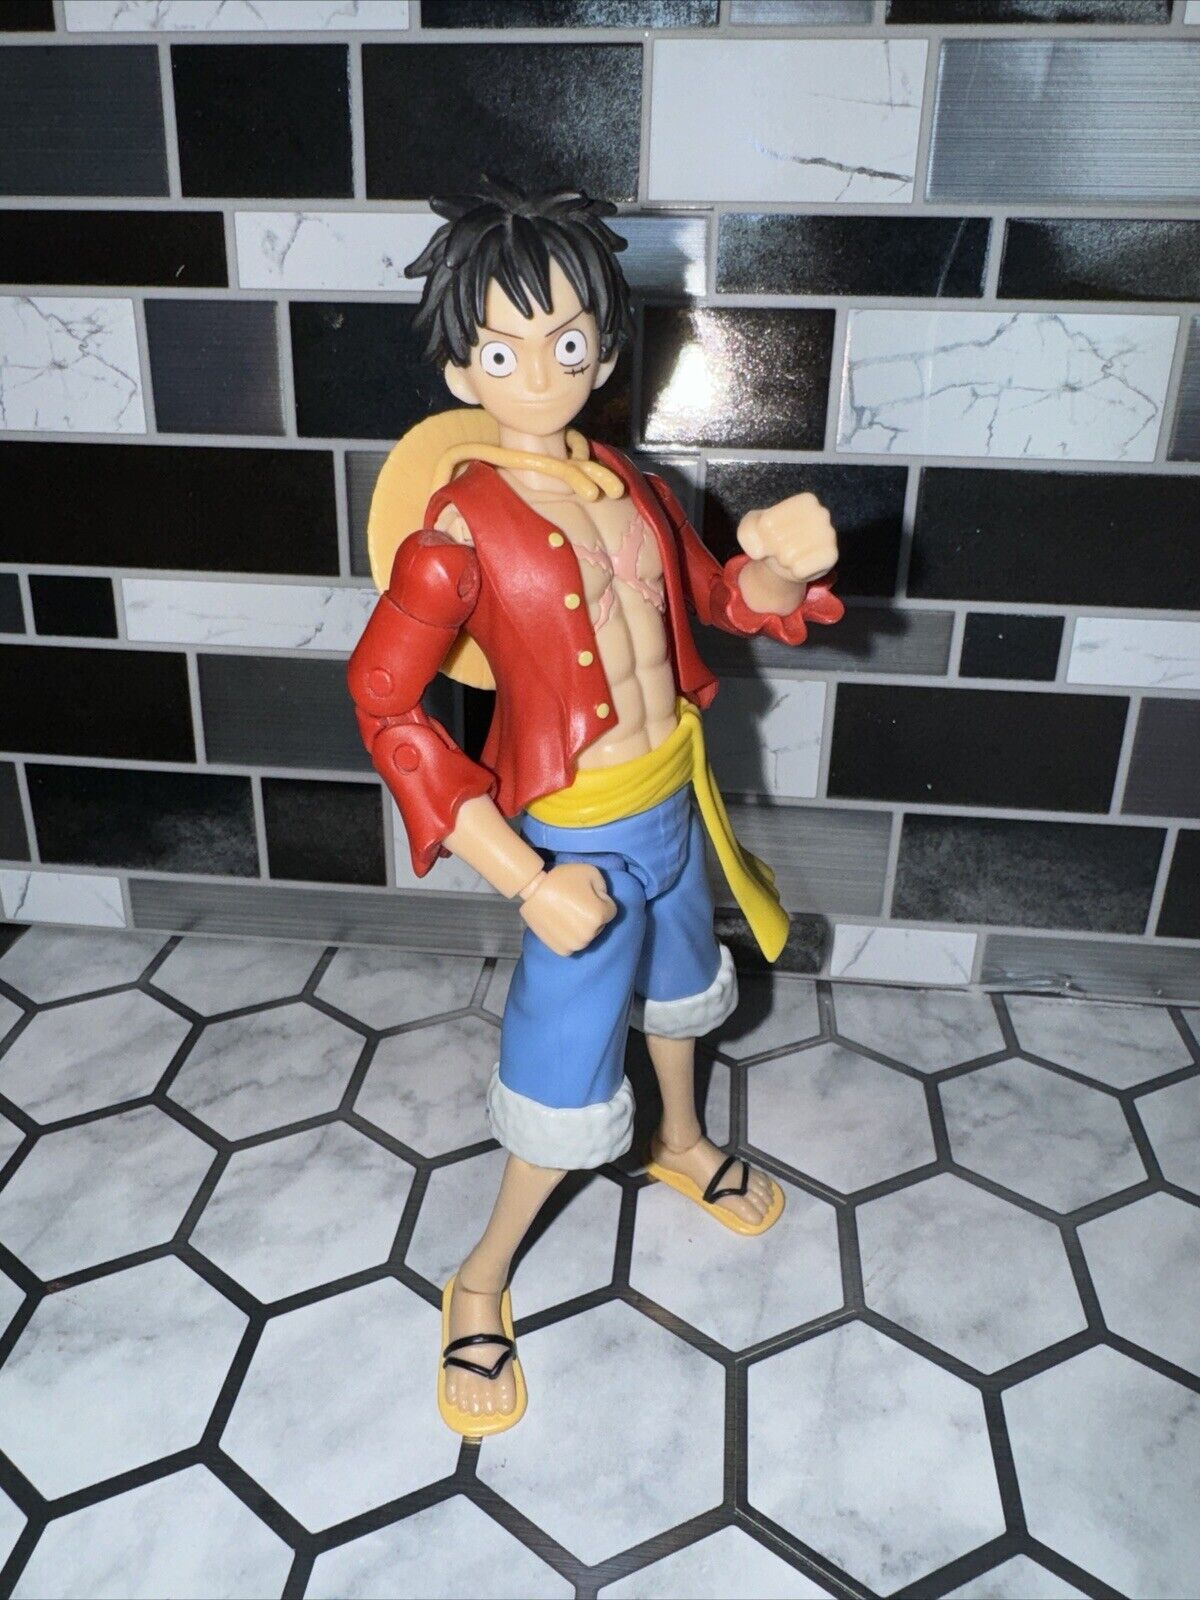 Anime Heroes - One Piece Monkey D. Luffy v2